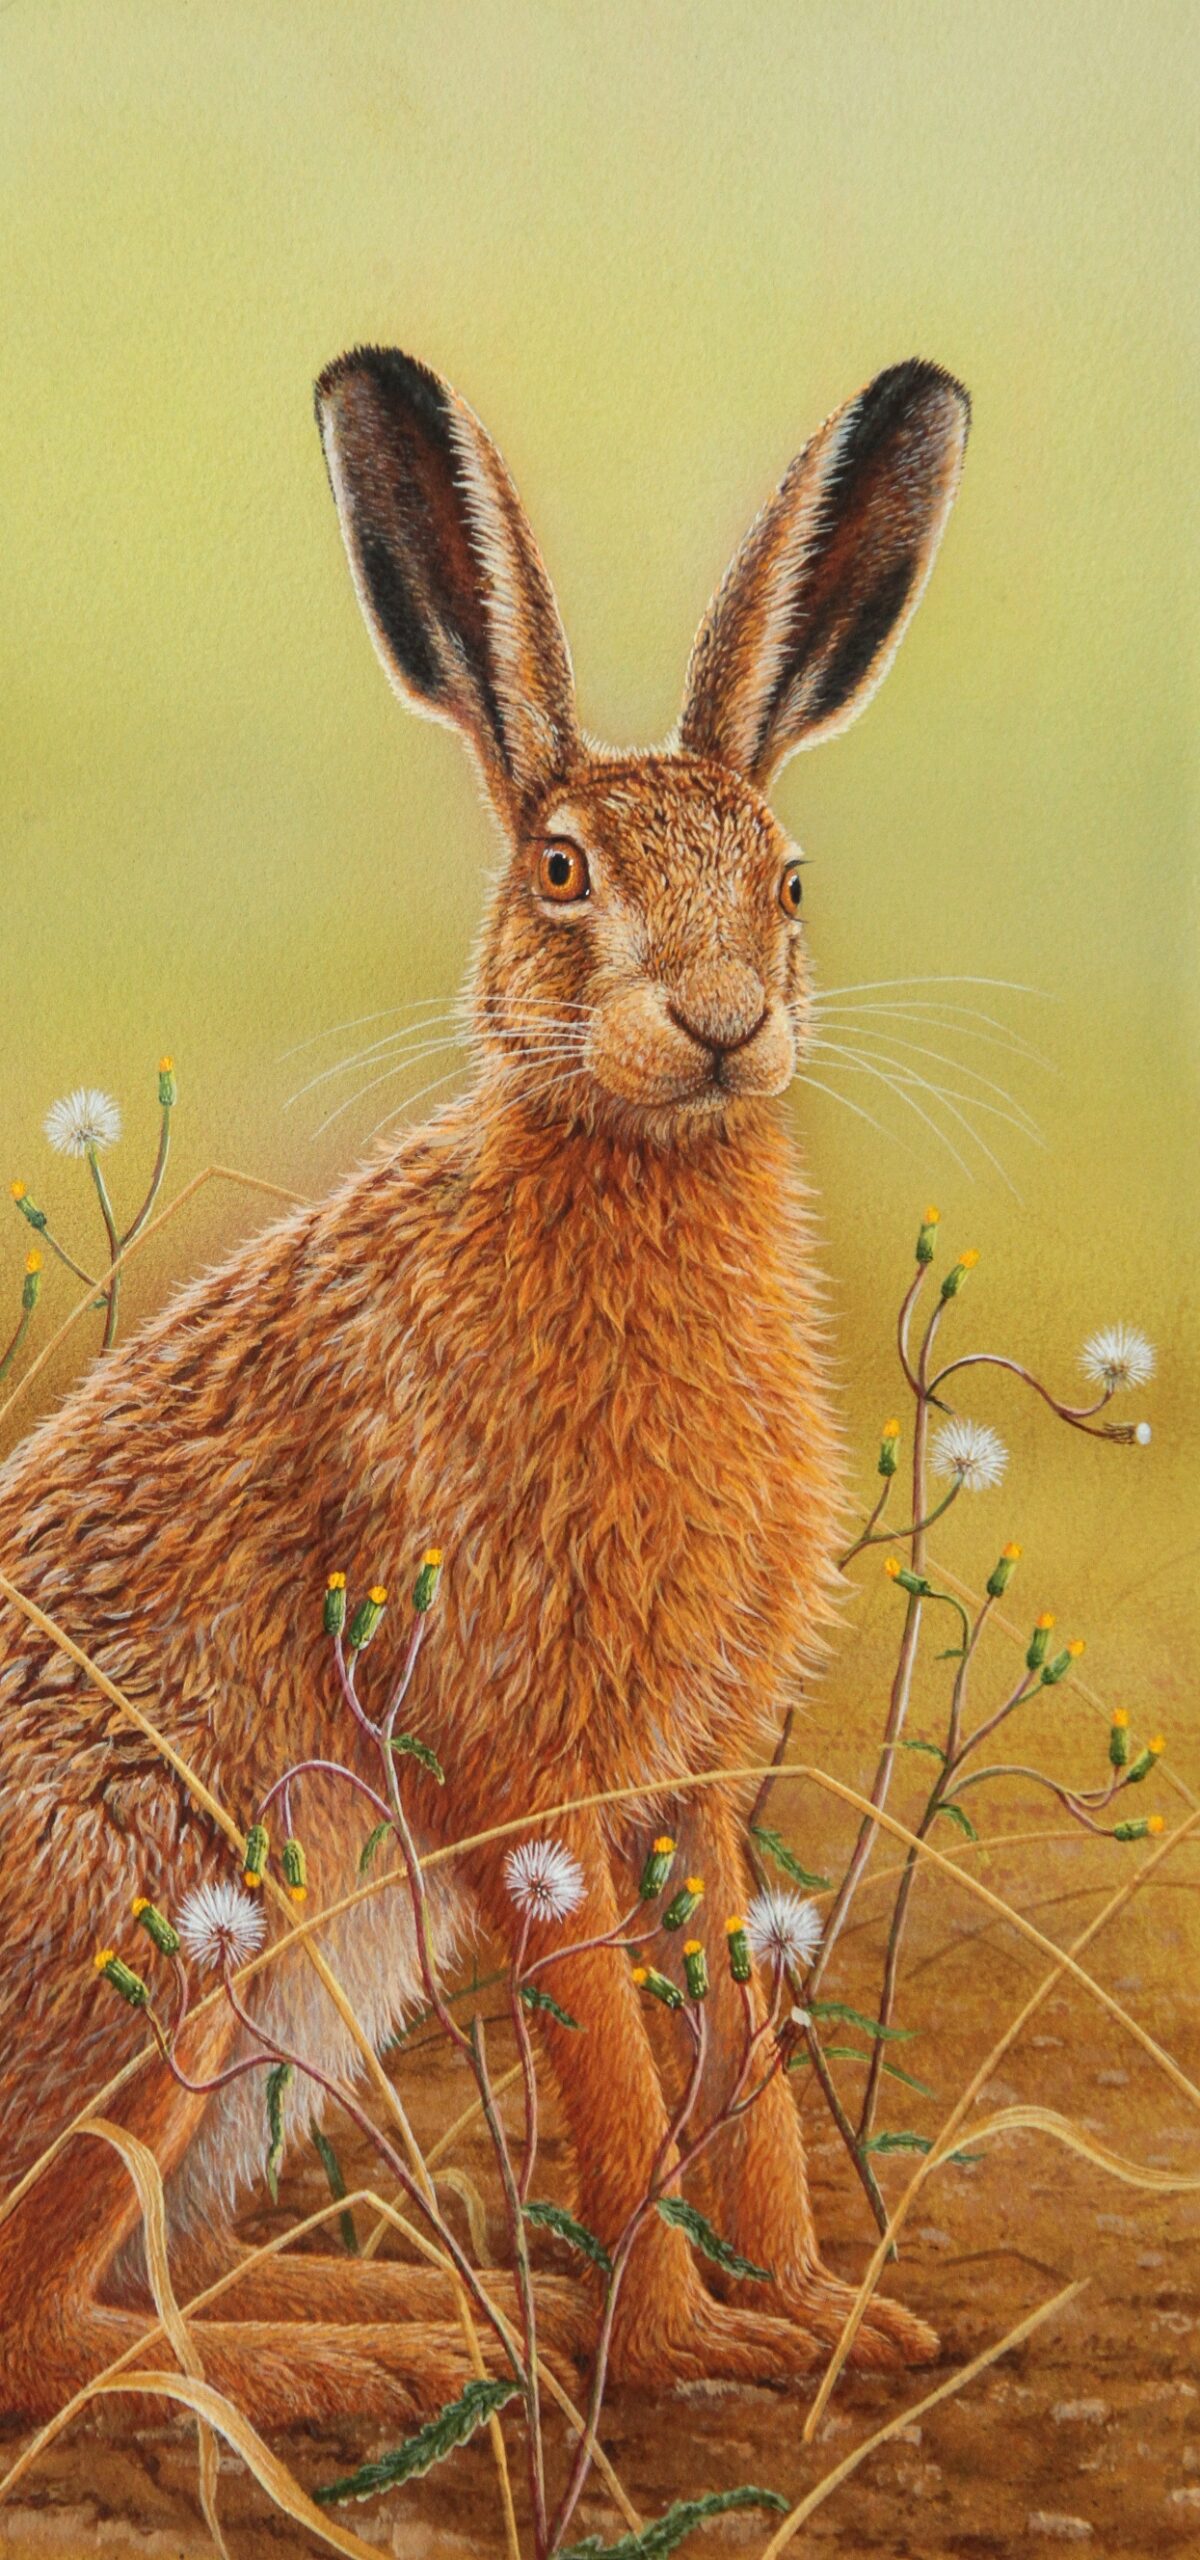 painting of a hare by robert e fuller hare is close up and posed against a brown grass and mayweed